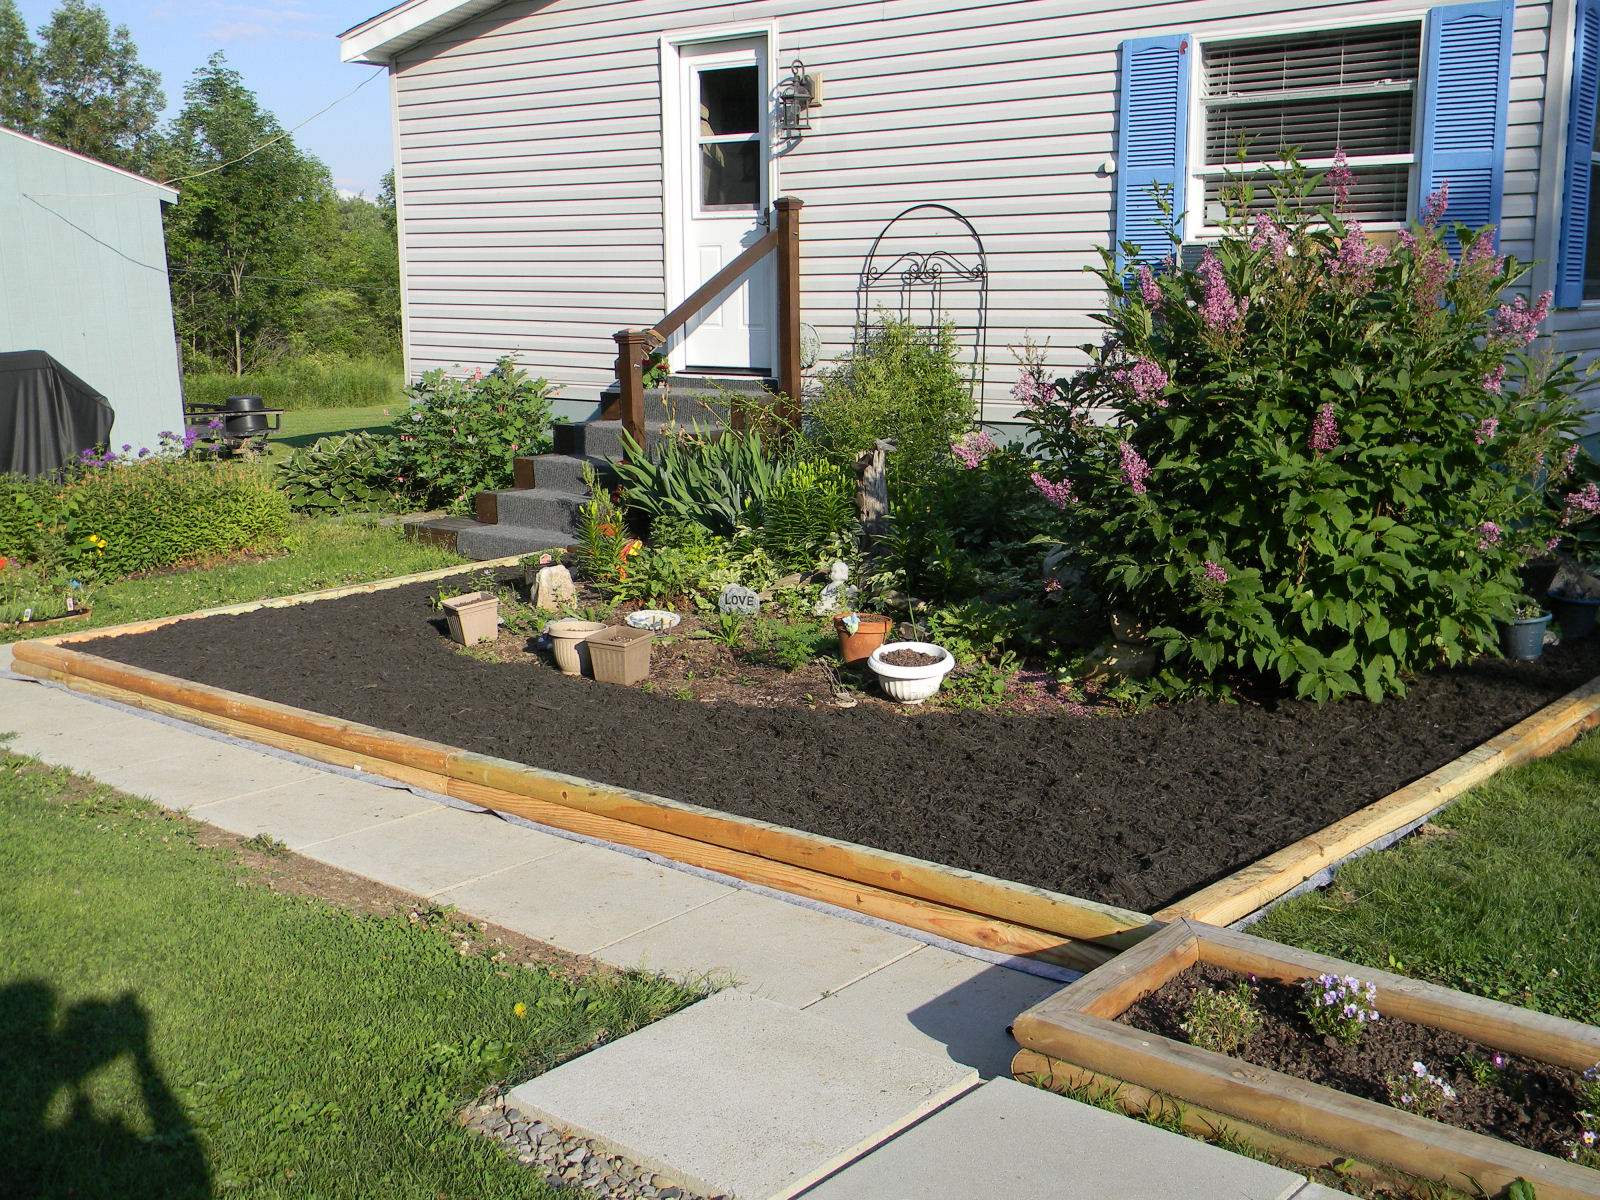 Landscaping Ideas For Mobile Home Diy, Mobile Home Landscaping Ideas